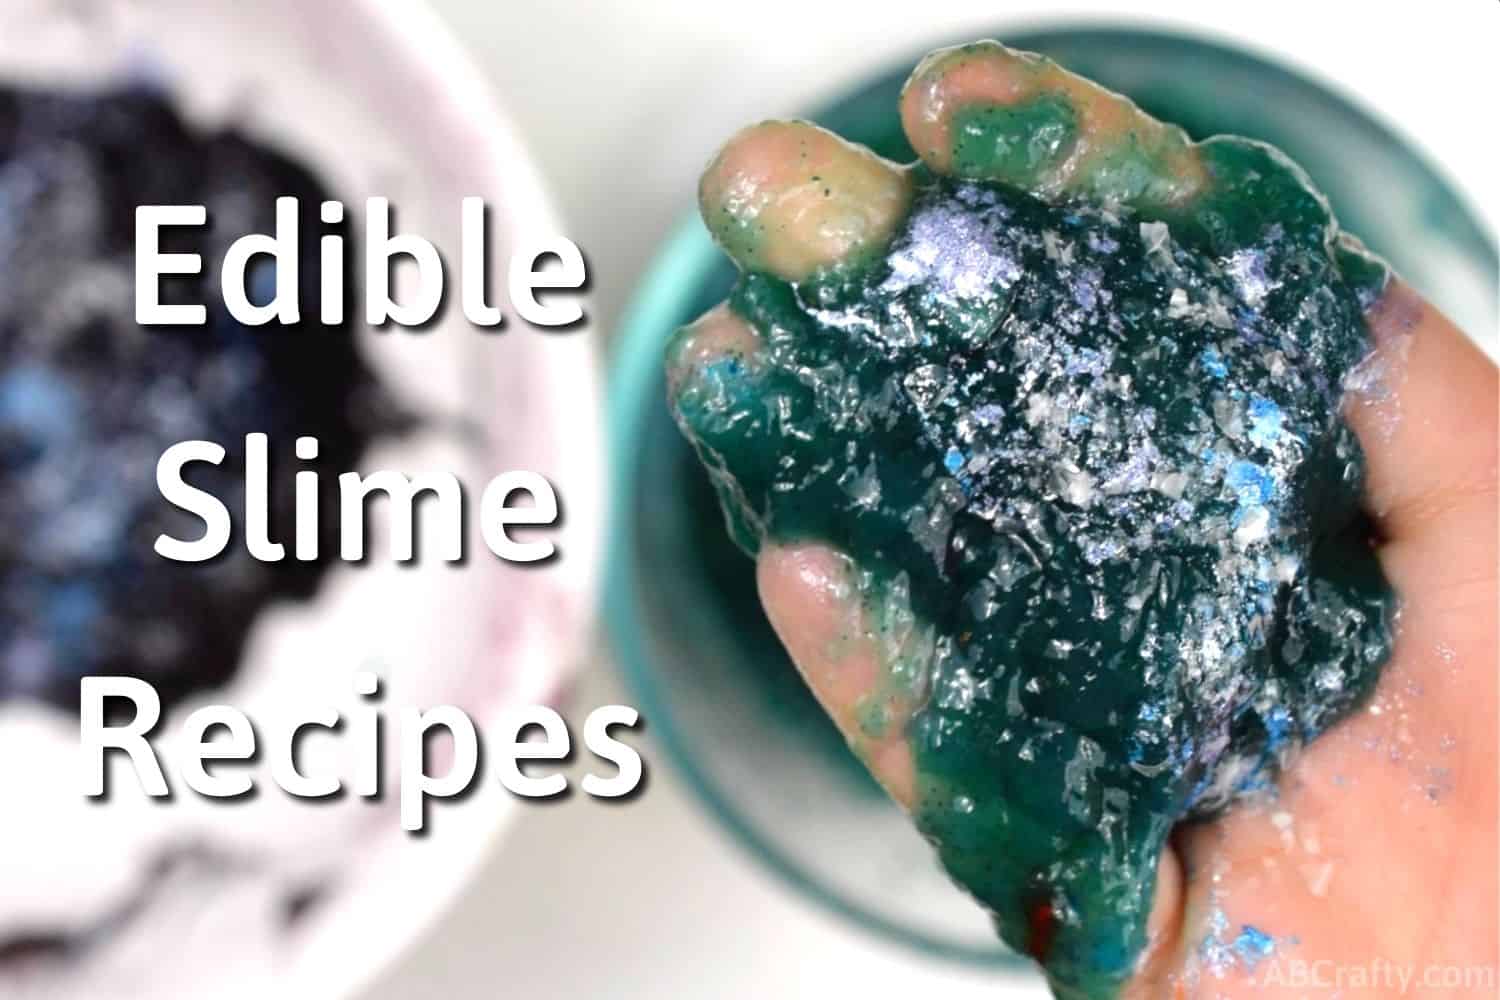 How to Make Slime With Natural, Edible Ingredients